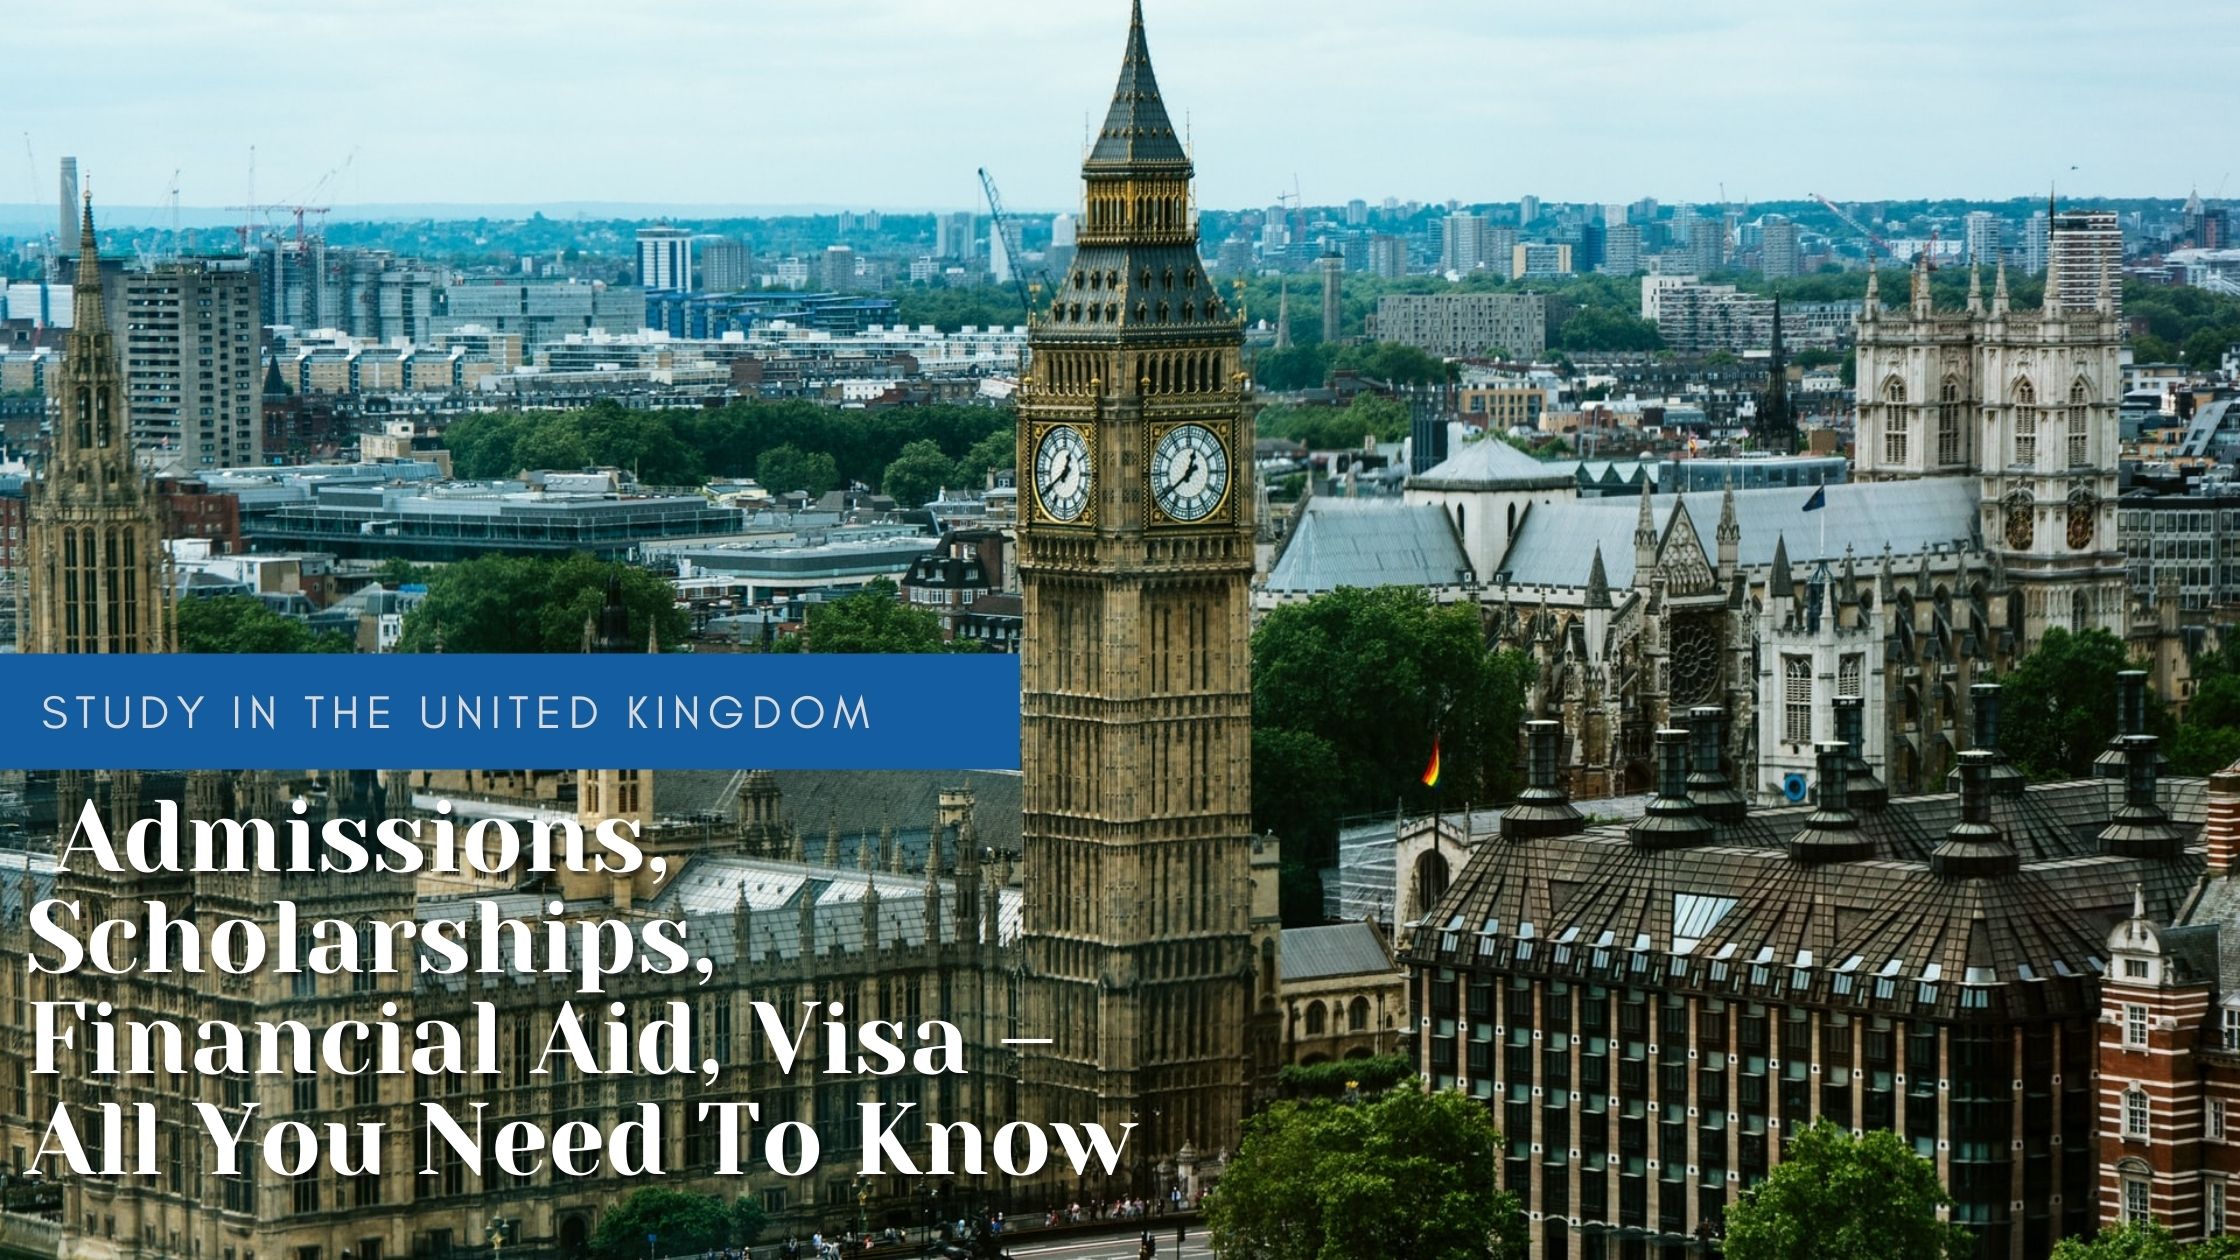 Study In United Kingdom - Admissions, Scholarships, Financial Aid, Visa – All You Need To Know